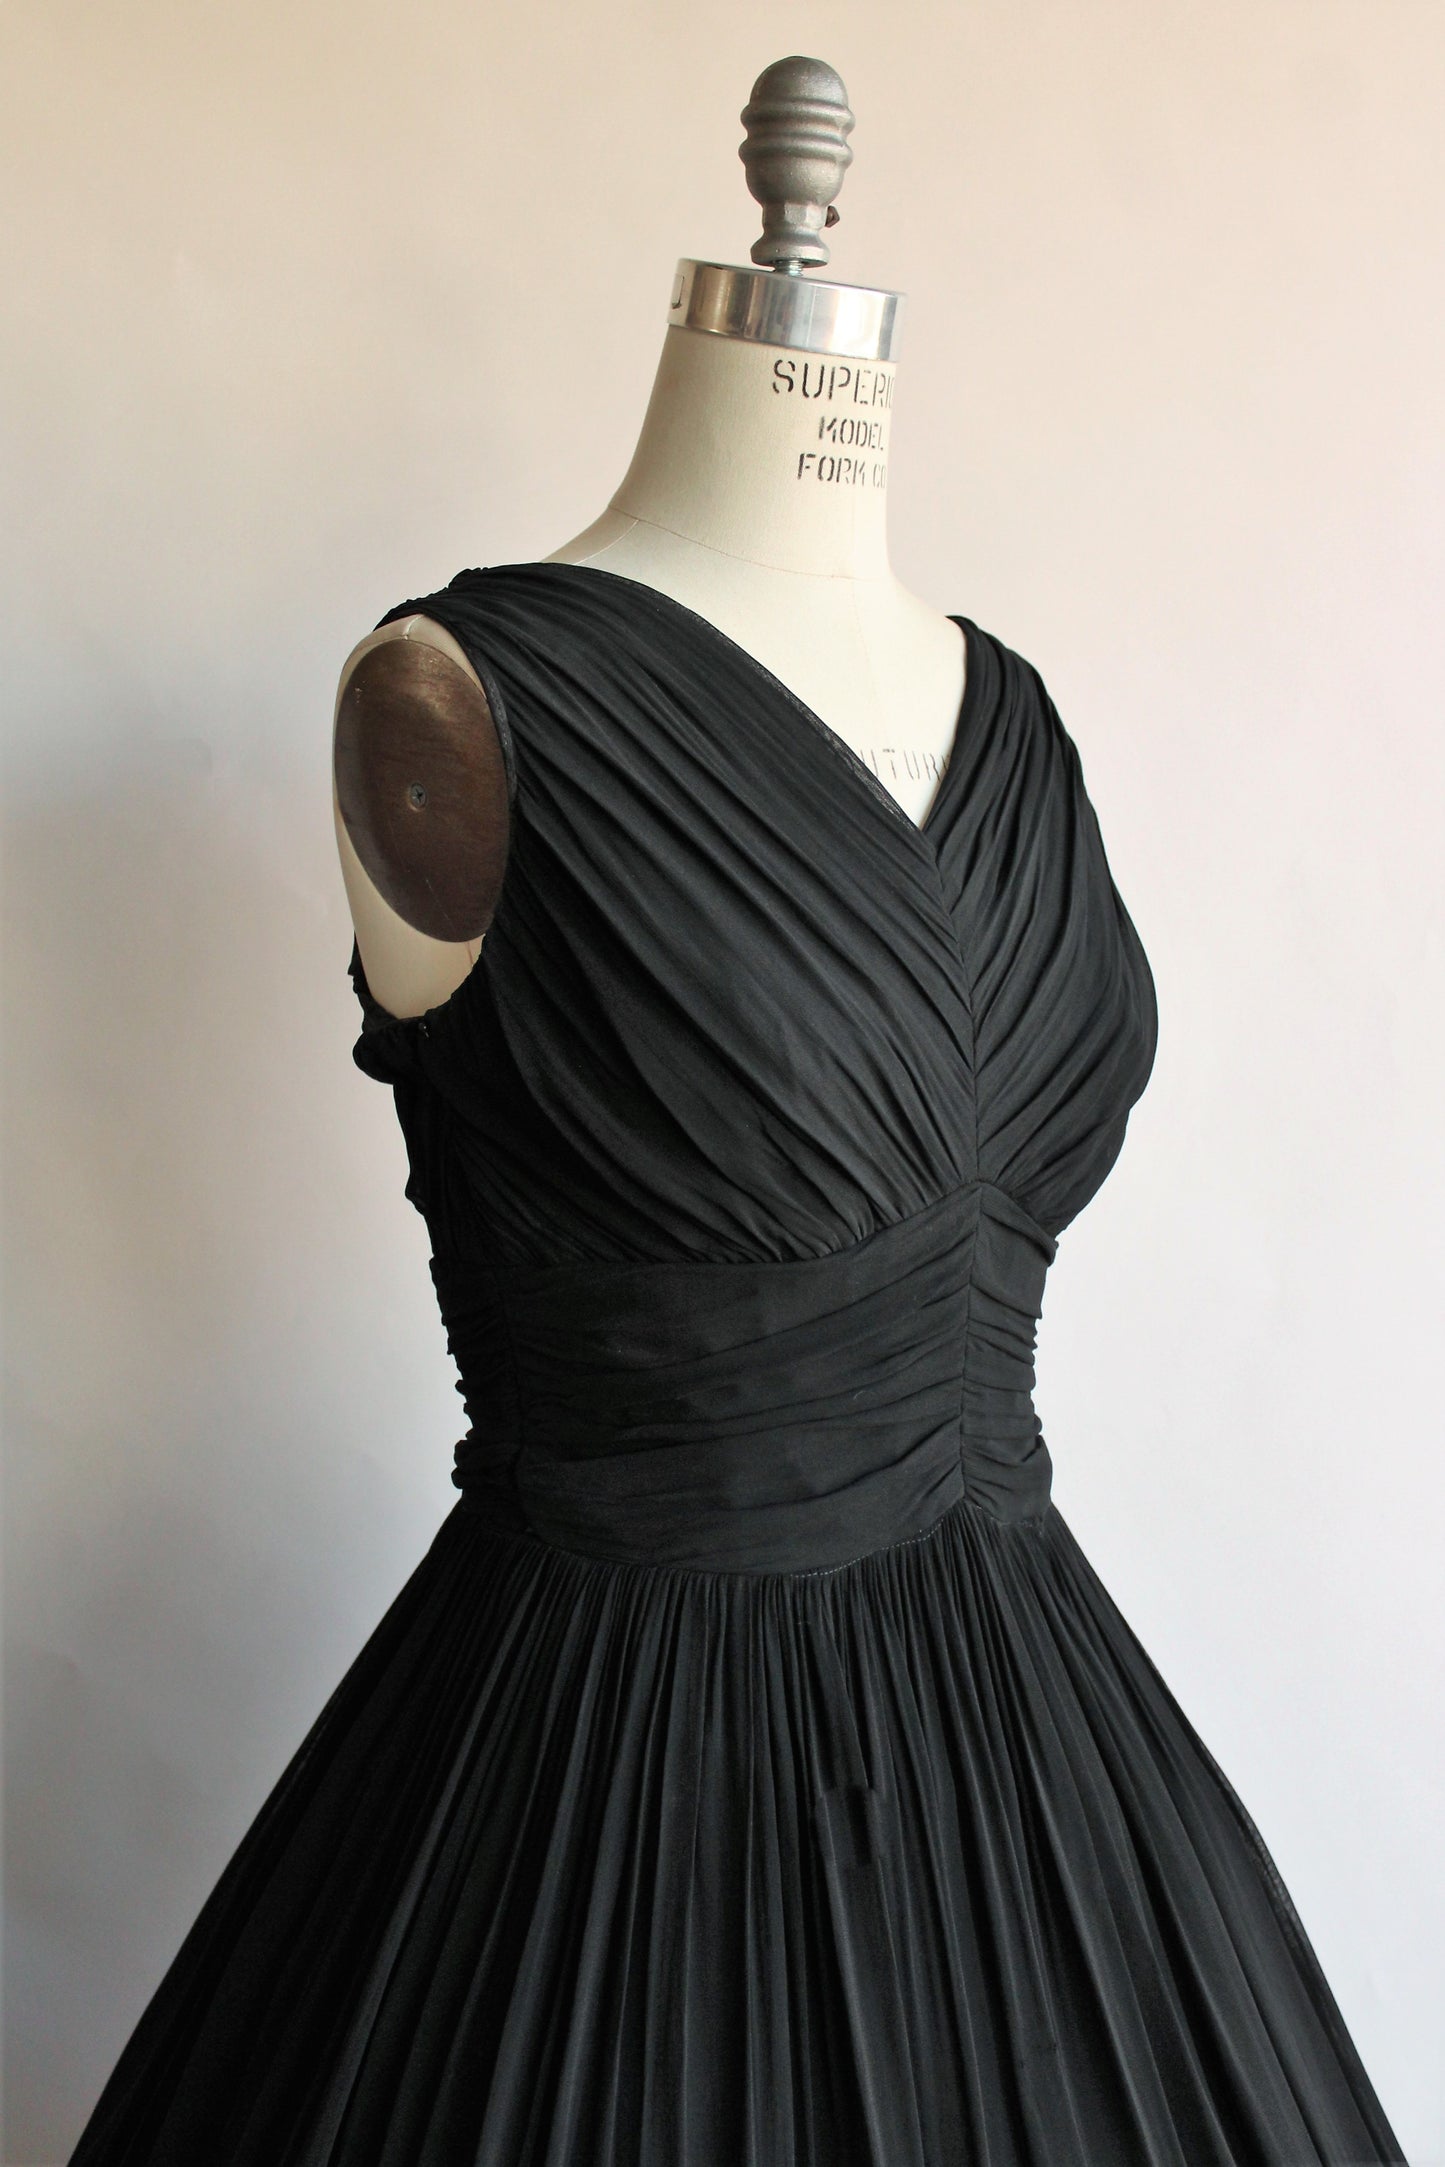 Vintage 1950s Black Pleated Fit and Flare Dress